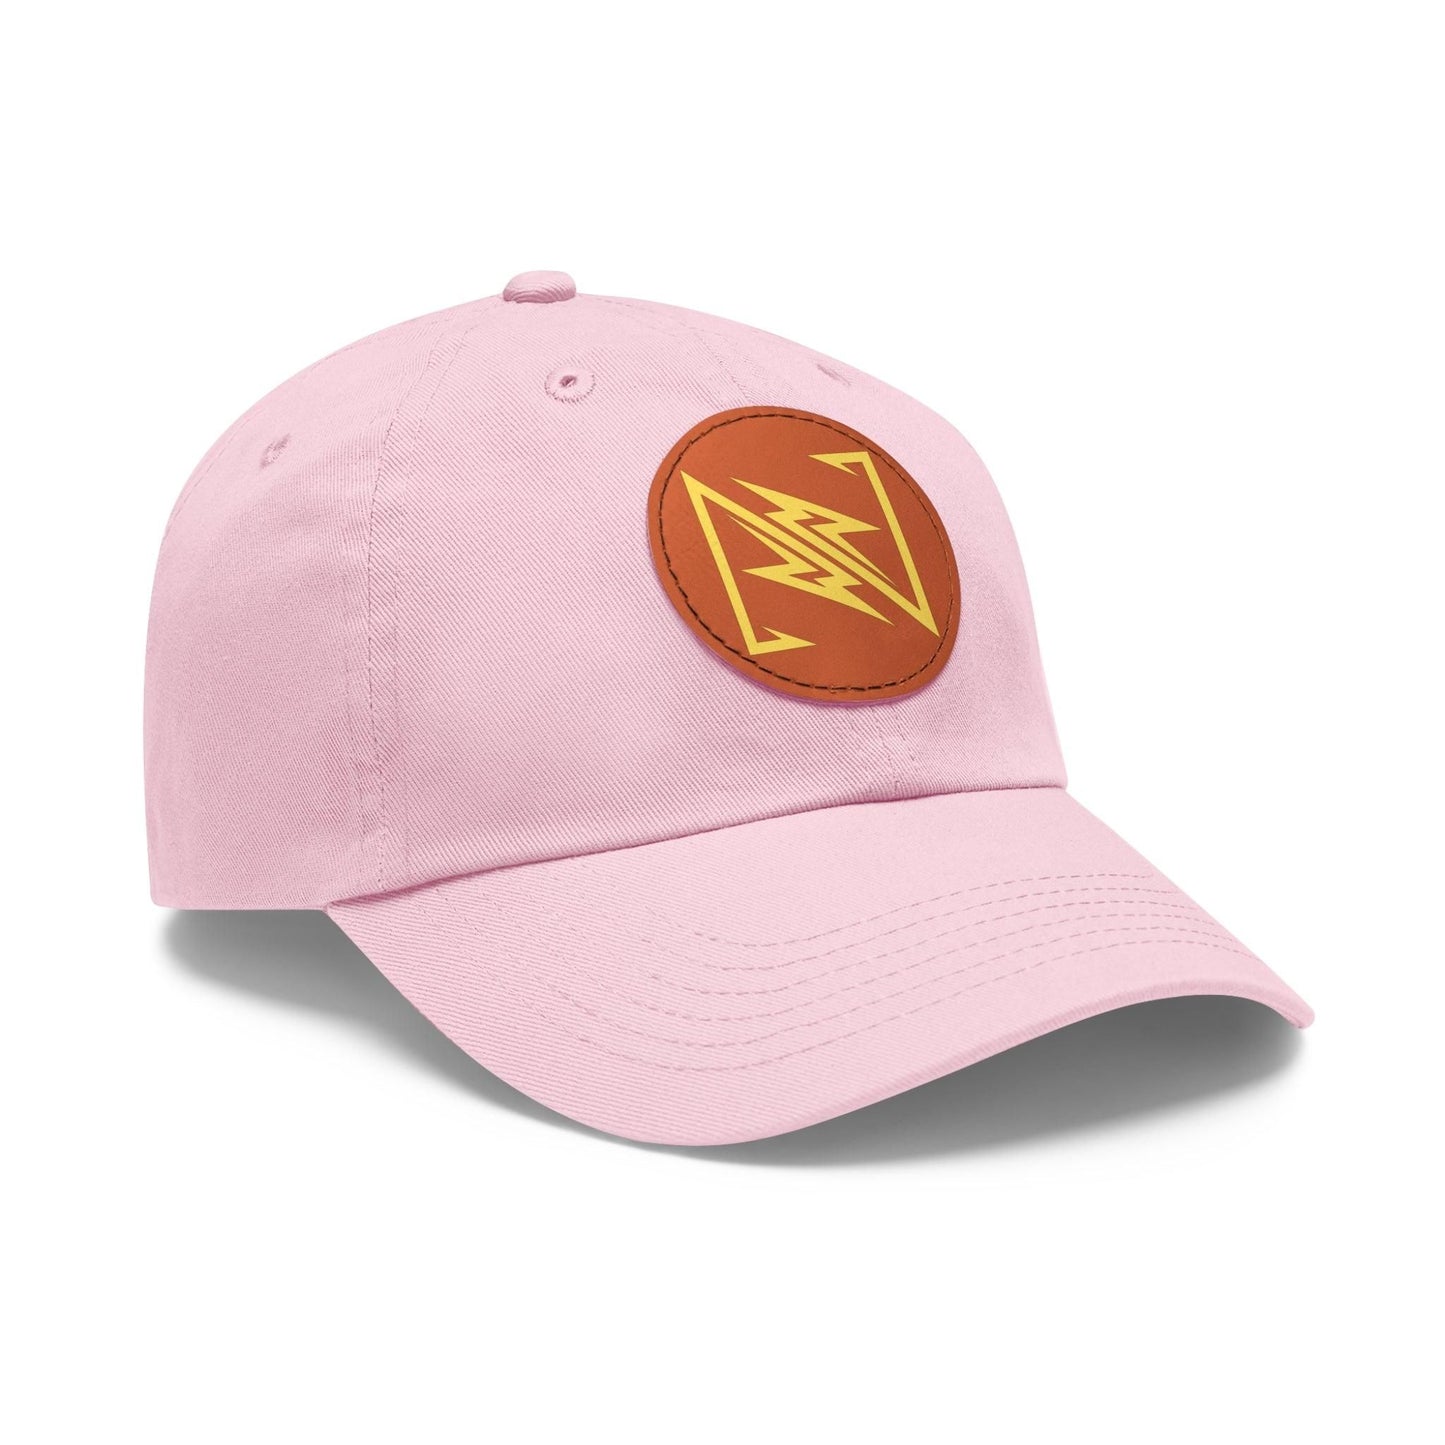 NX Vogue Baseball Hat with Leather Patch Cap Light Pink / Light Brown patch Circle One size